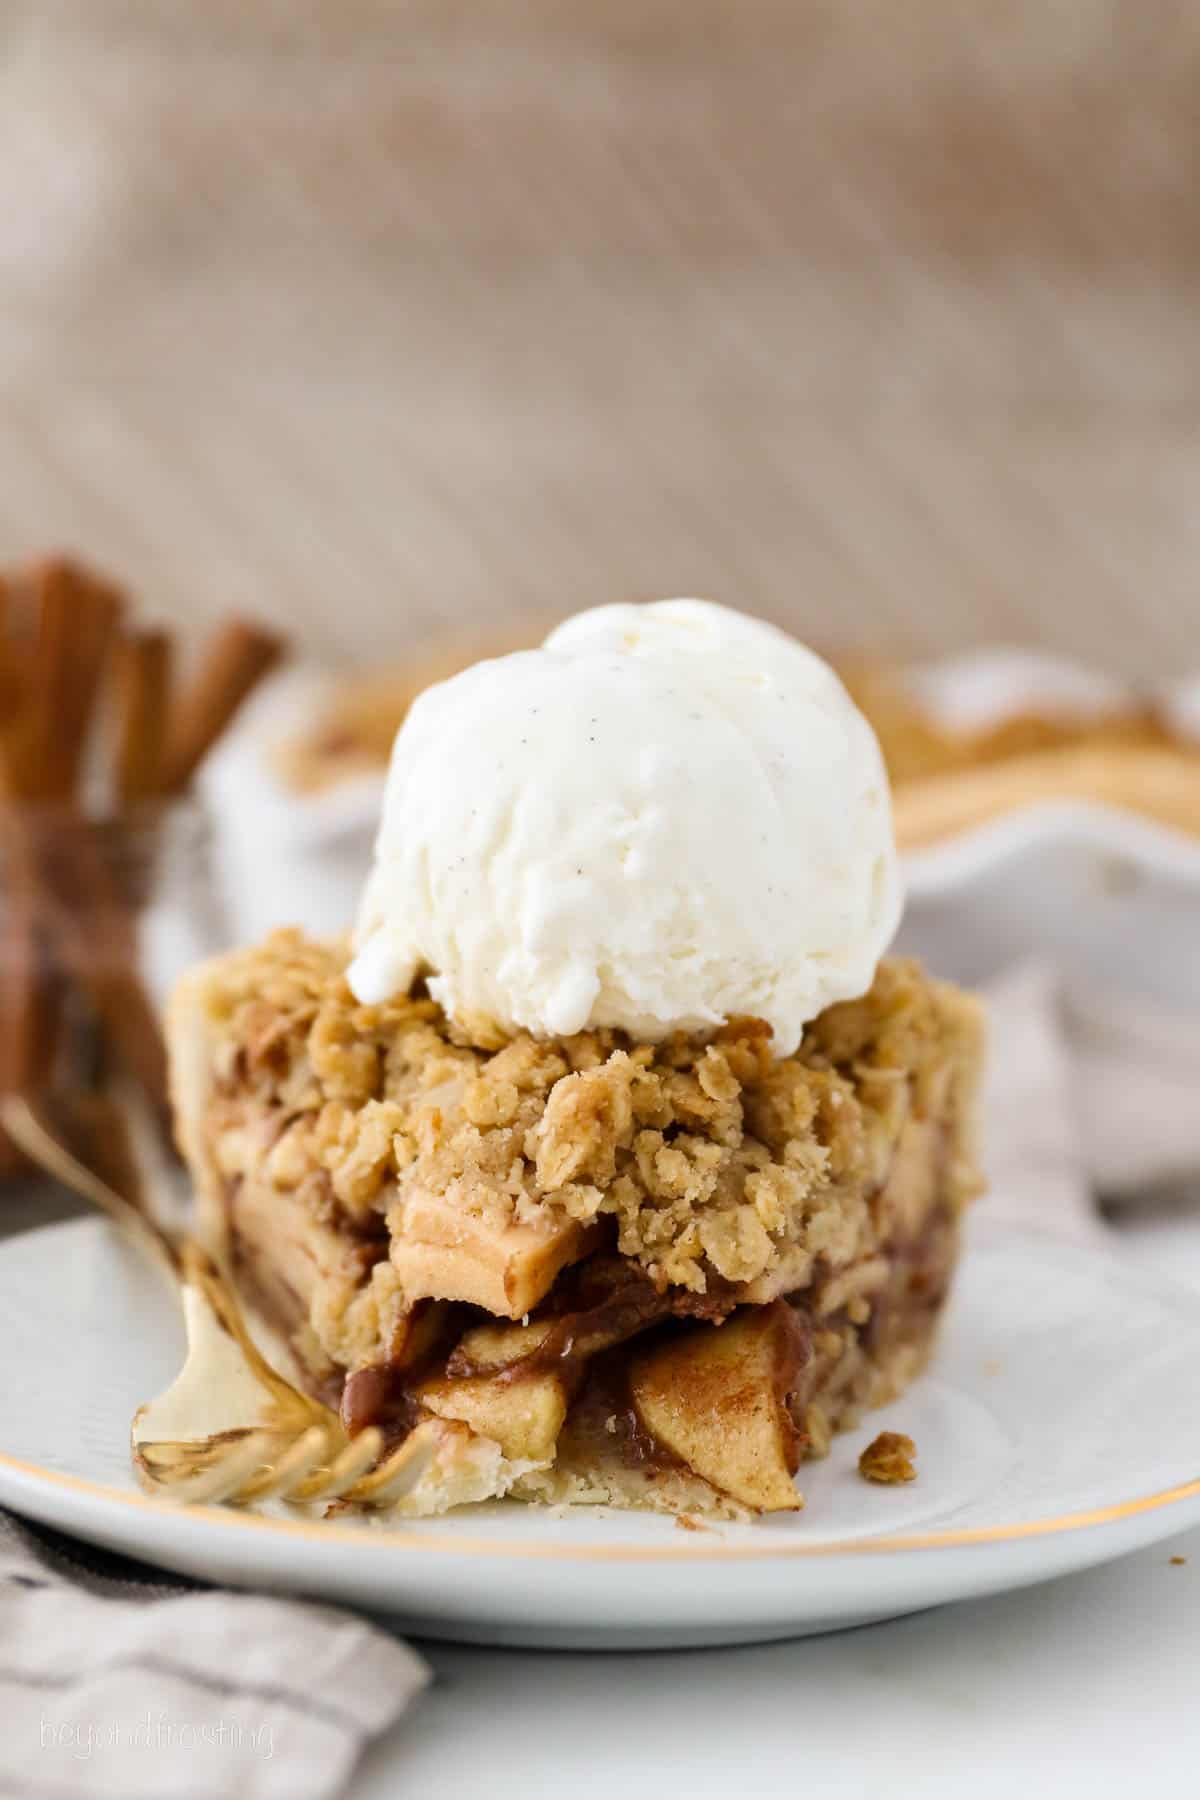 A slice of apple crumble pie on a plate with a forkful missing from the tip, topped with a scoop of vanilla ice cream.